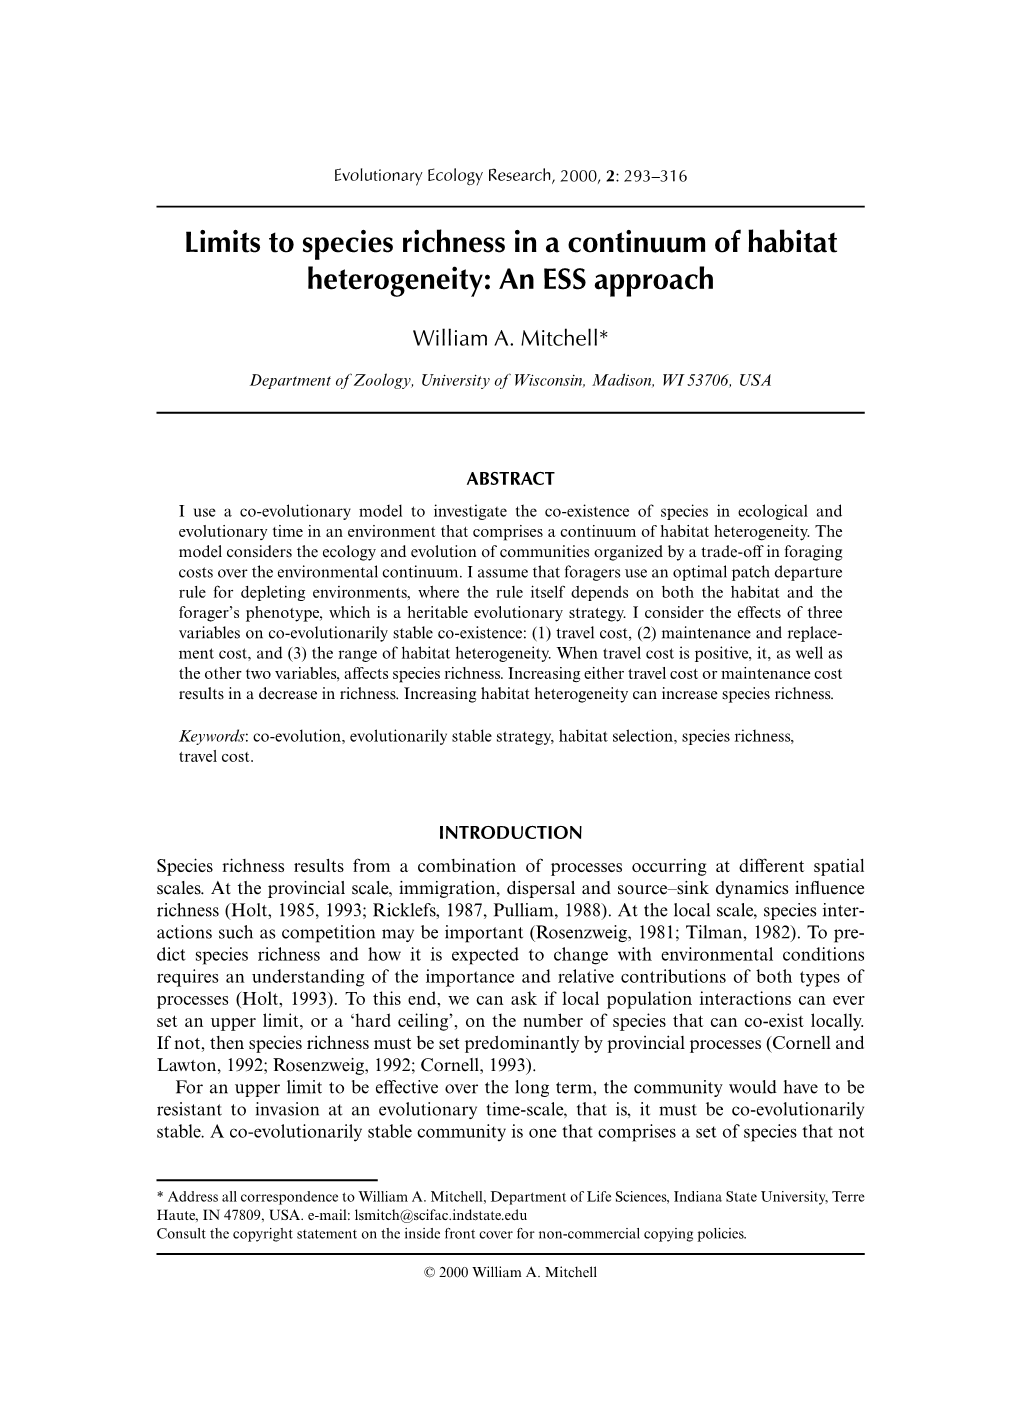 Limits to Species Richness in a Continuum of Habitat Heterogeneity: an ESS Approach